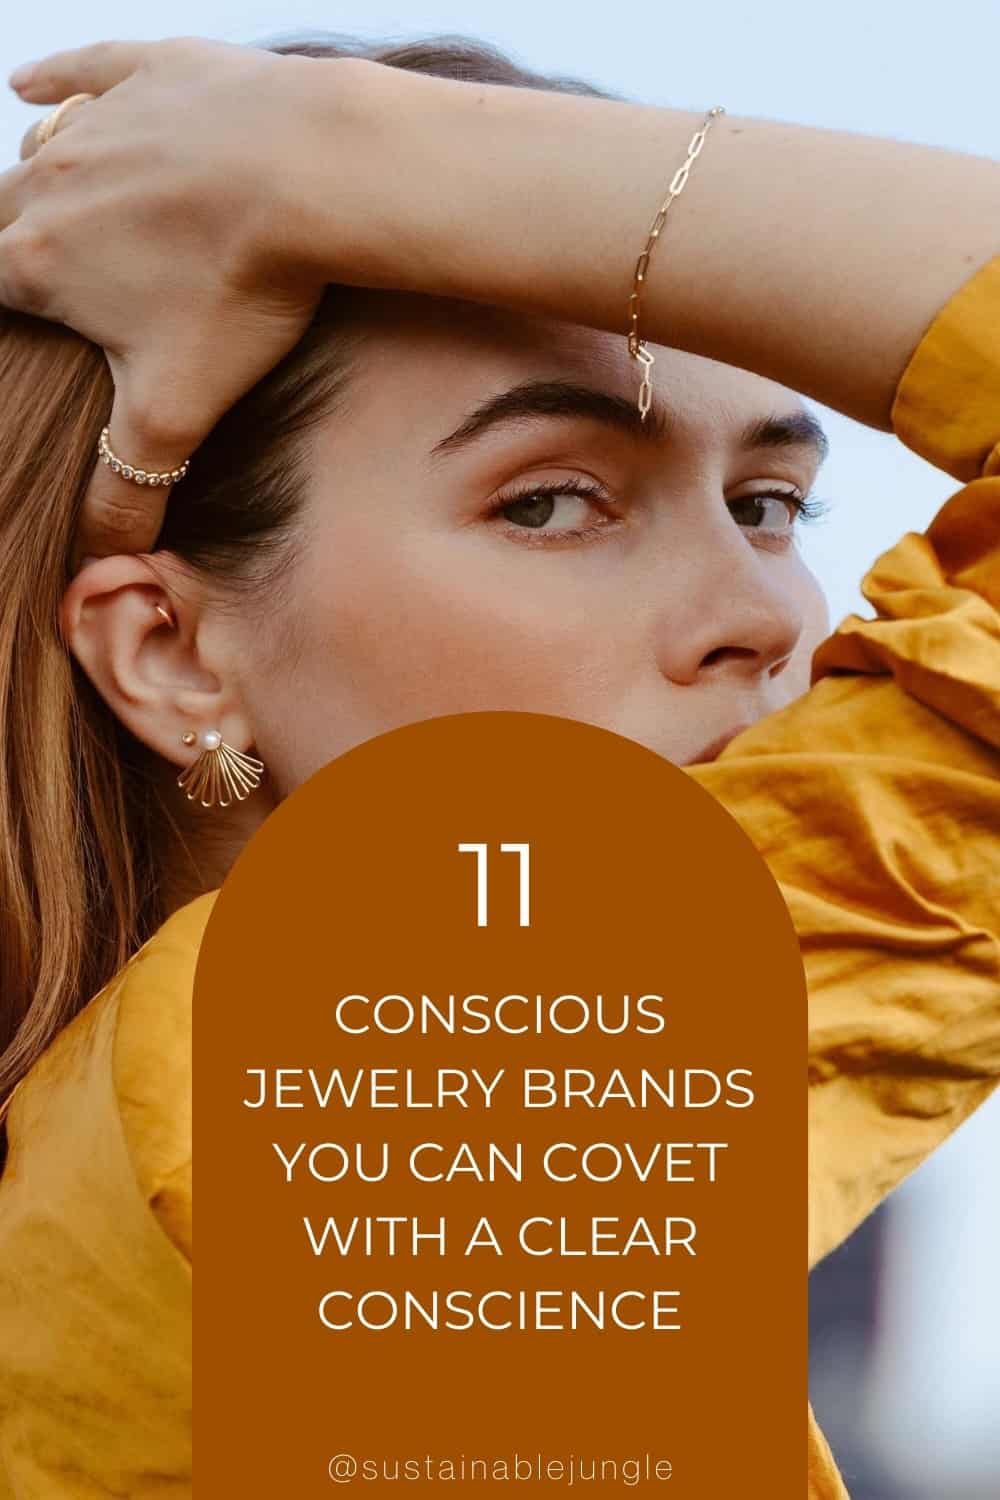 11 Conscious Jewelry Brands You Can Covet With A Clear Conscience #consciousjewelry #ecoconsciousjewelry #whatisconsciousjewelry #sociallyconsciousjewelry #earthconsciousjewelry #jewelryfortheecoconscious #consciousjewelrybrands #bestconsciousjewelry #sustainablejungle Image by Aurate